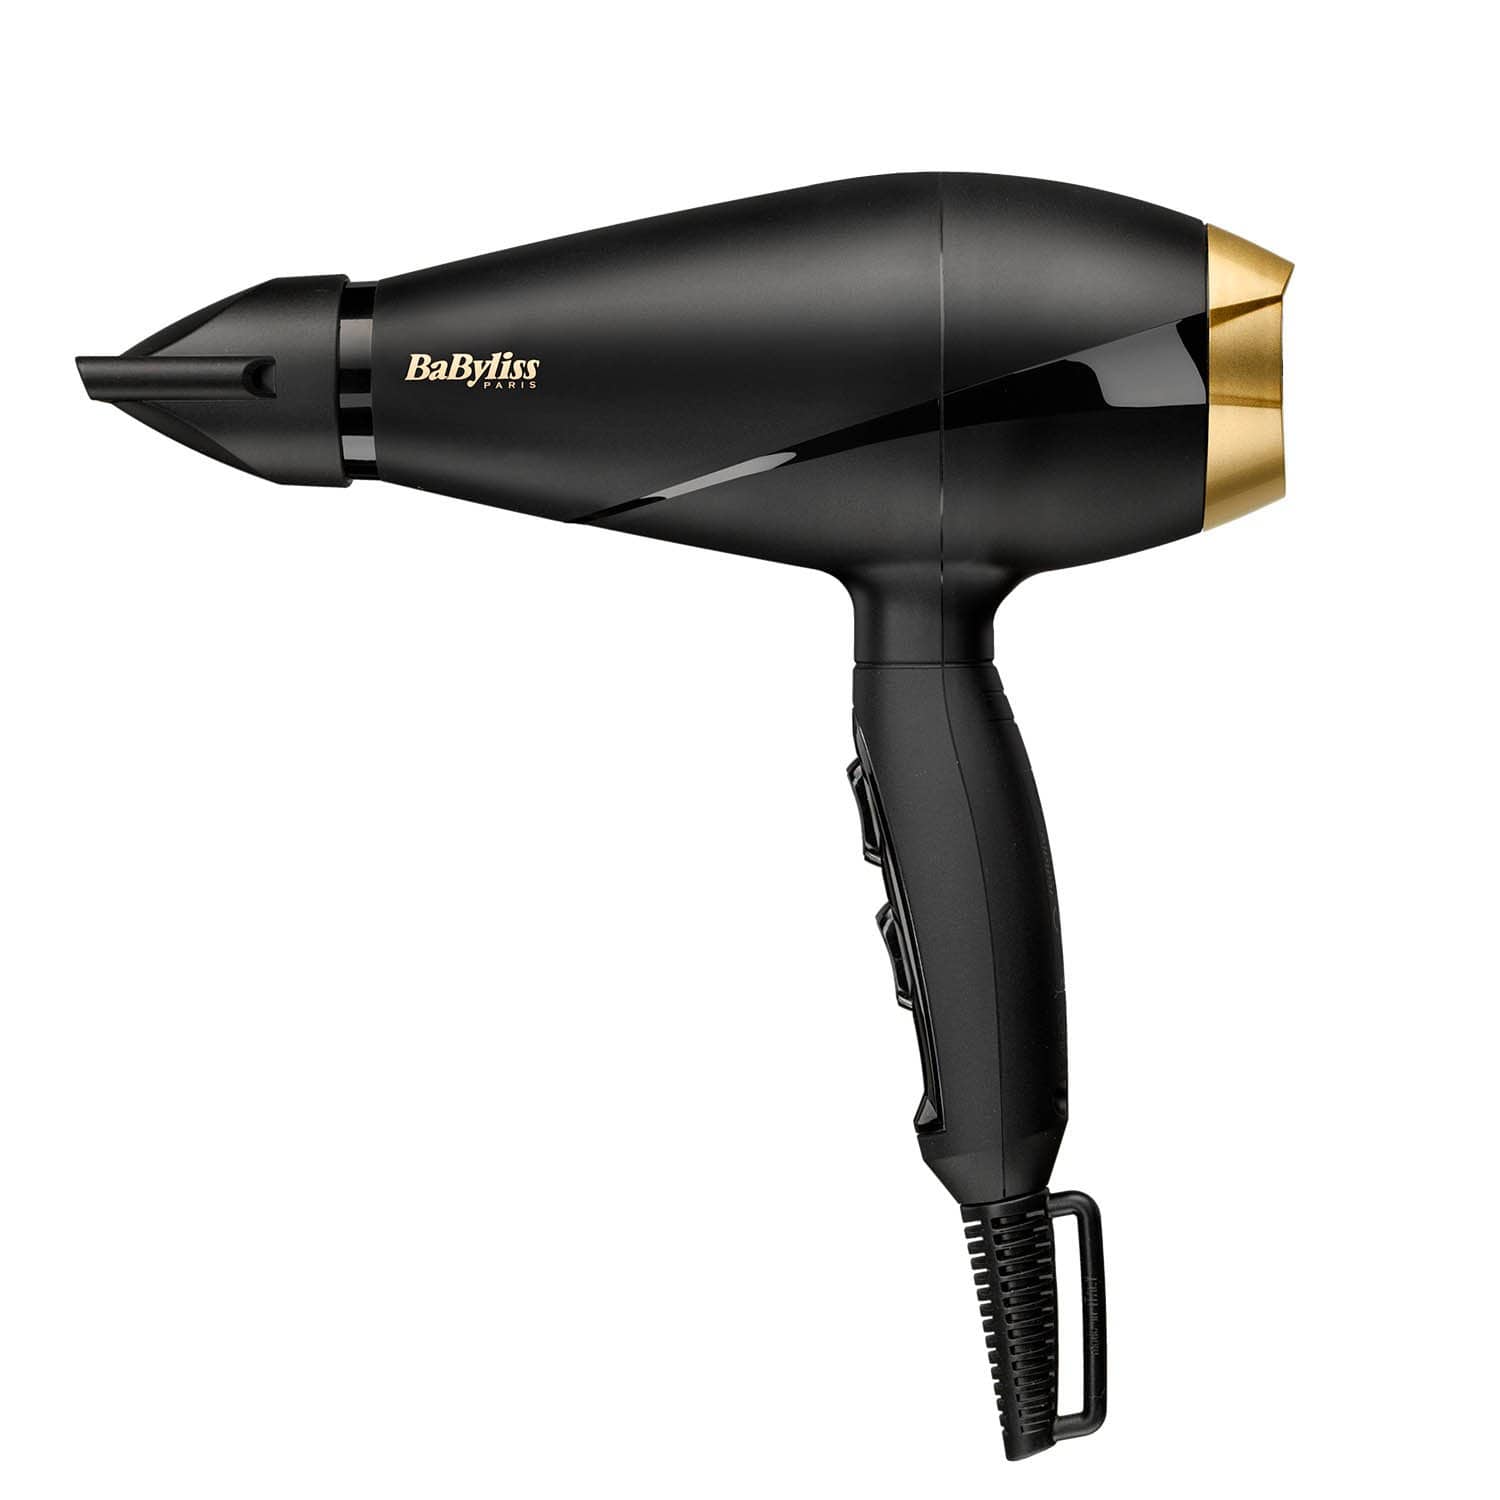 BABYLISS AC DRYER 2000W 6MM NOZZLE MADE IN ITALY - 6704SDE